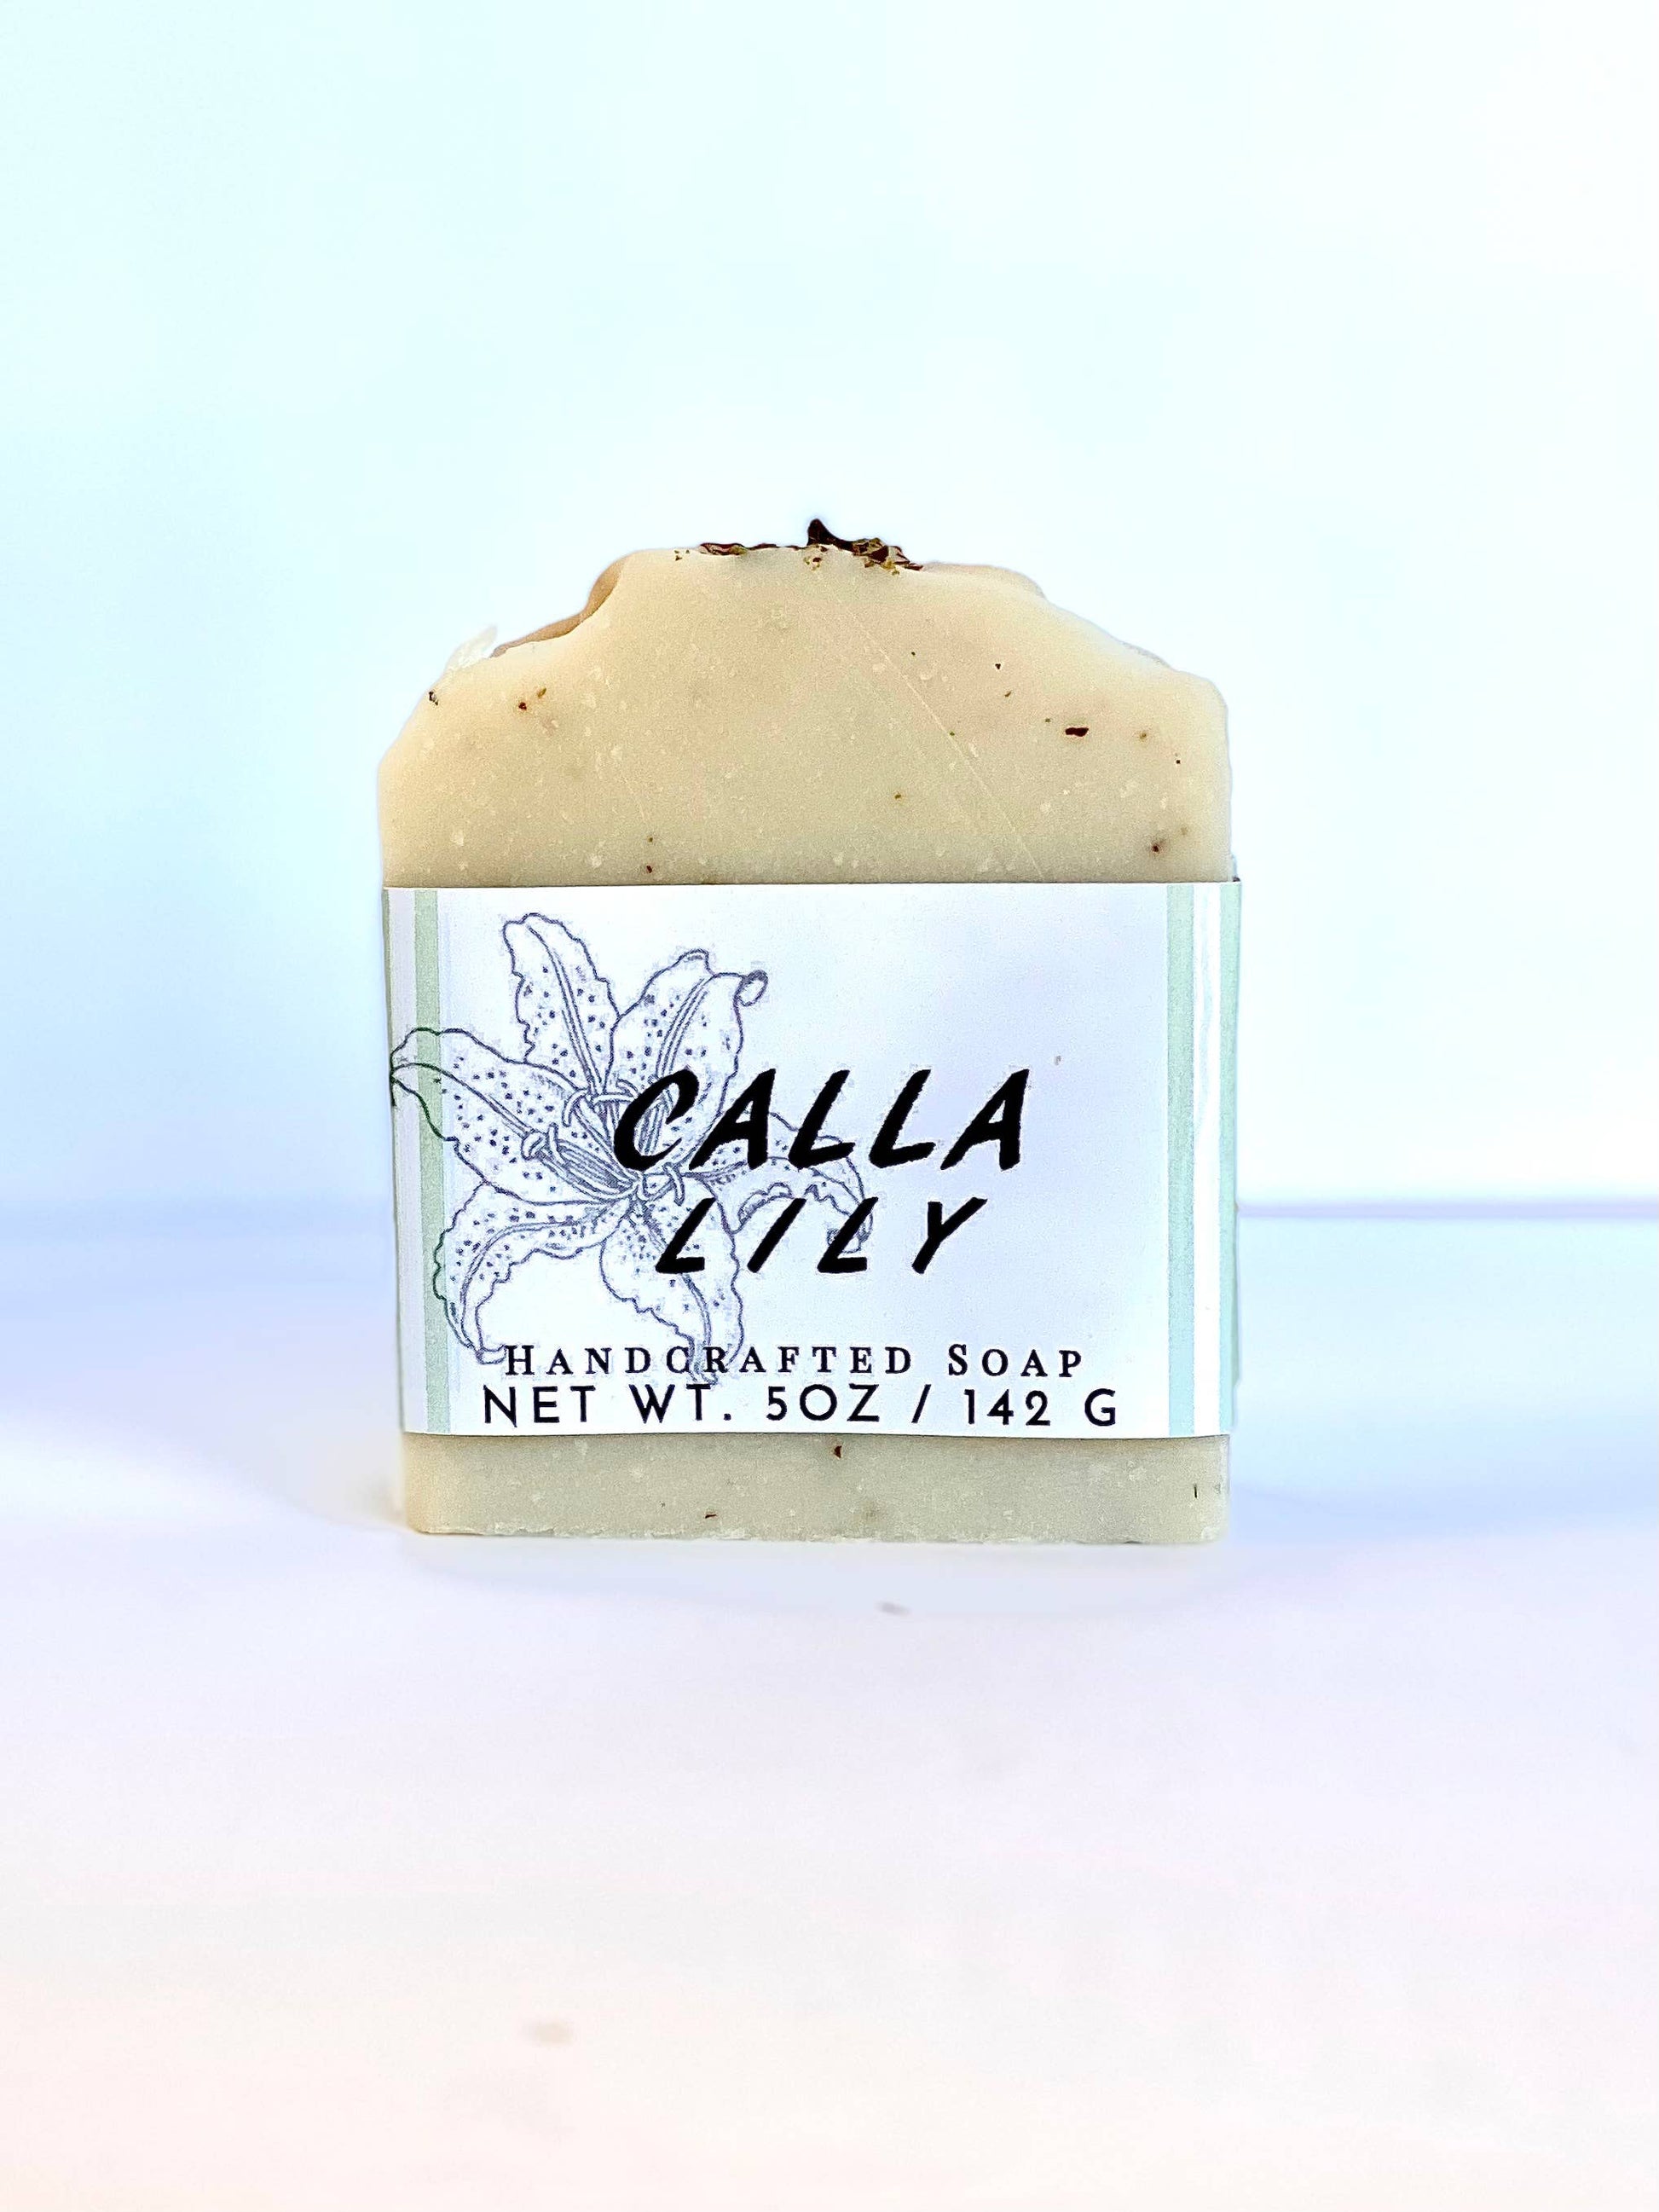 5 oz Charleston Lily Handcrafted Soap - Pluff Mud Mercantile